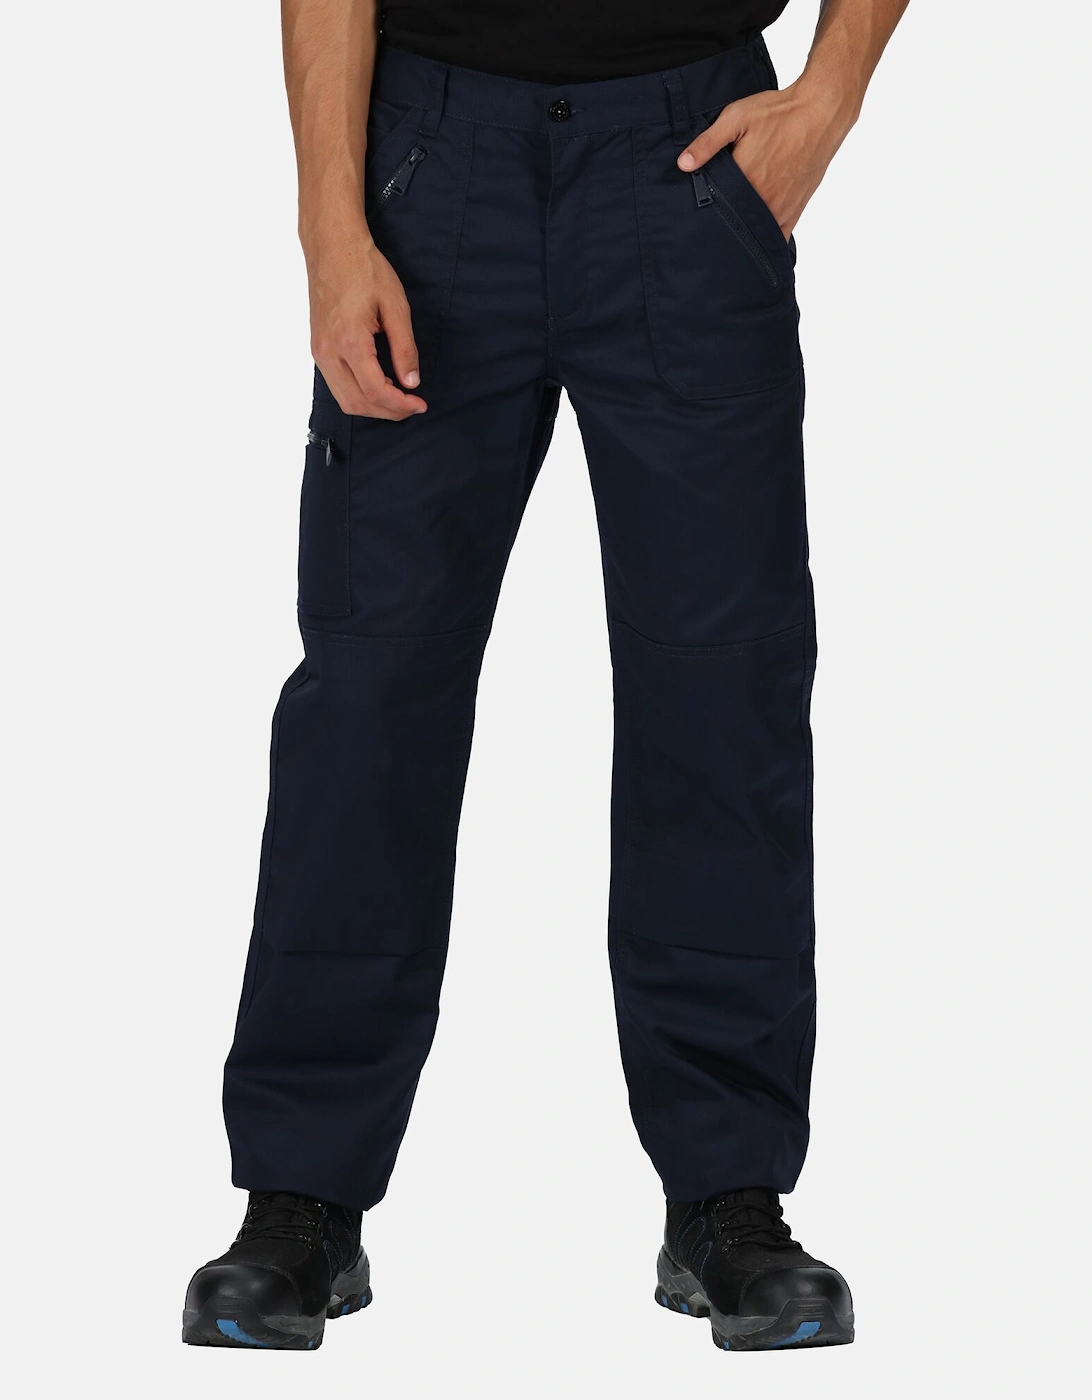 Mens Pro Action Waterproof Trousers - Long (34in)